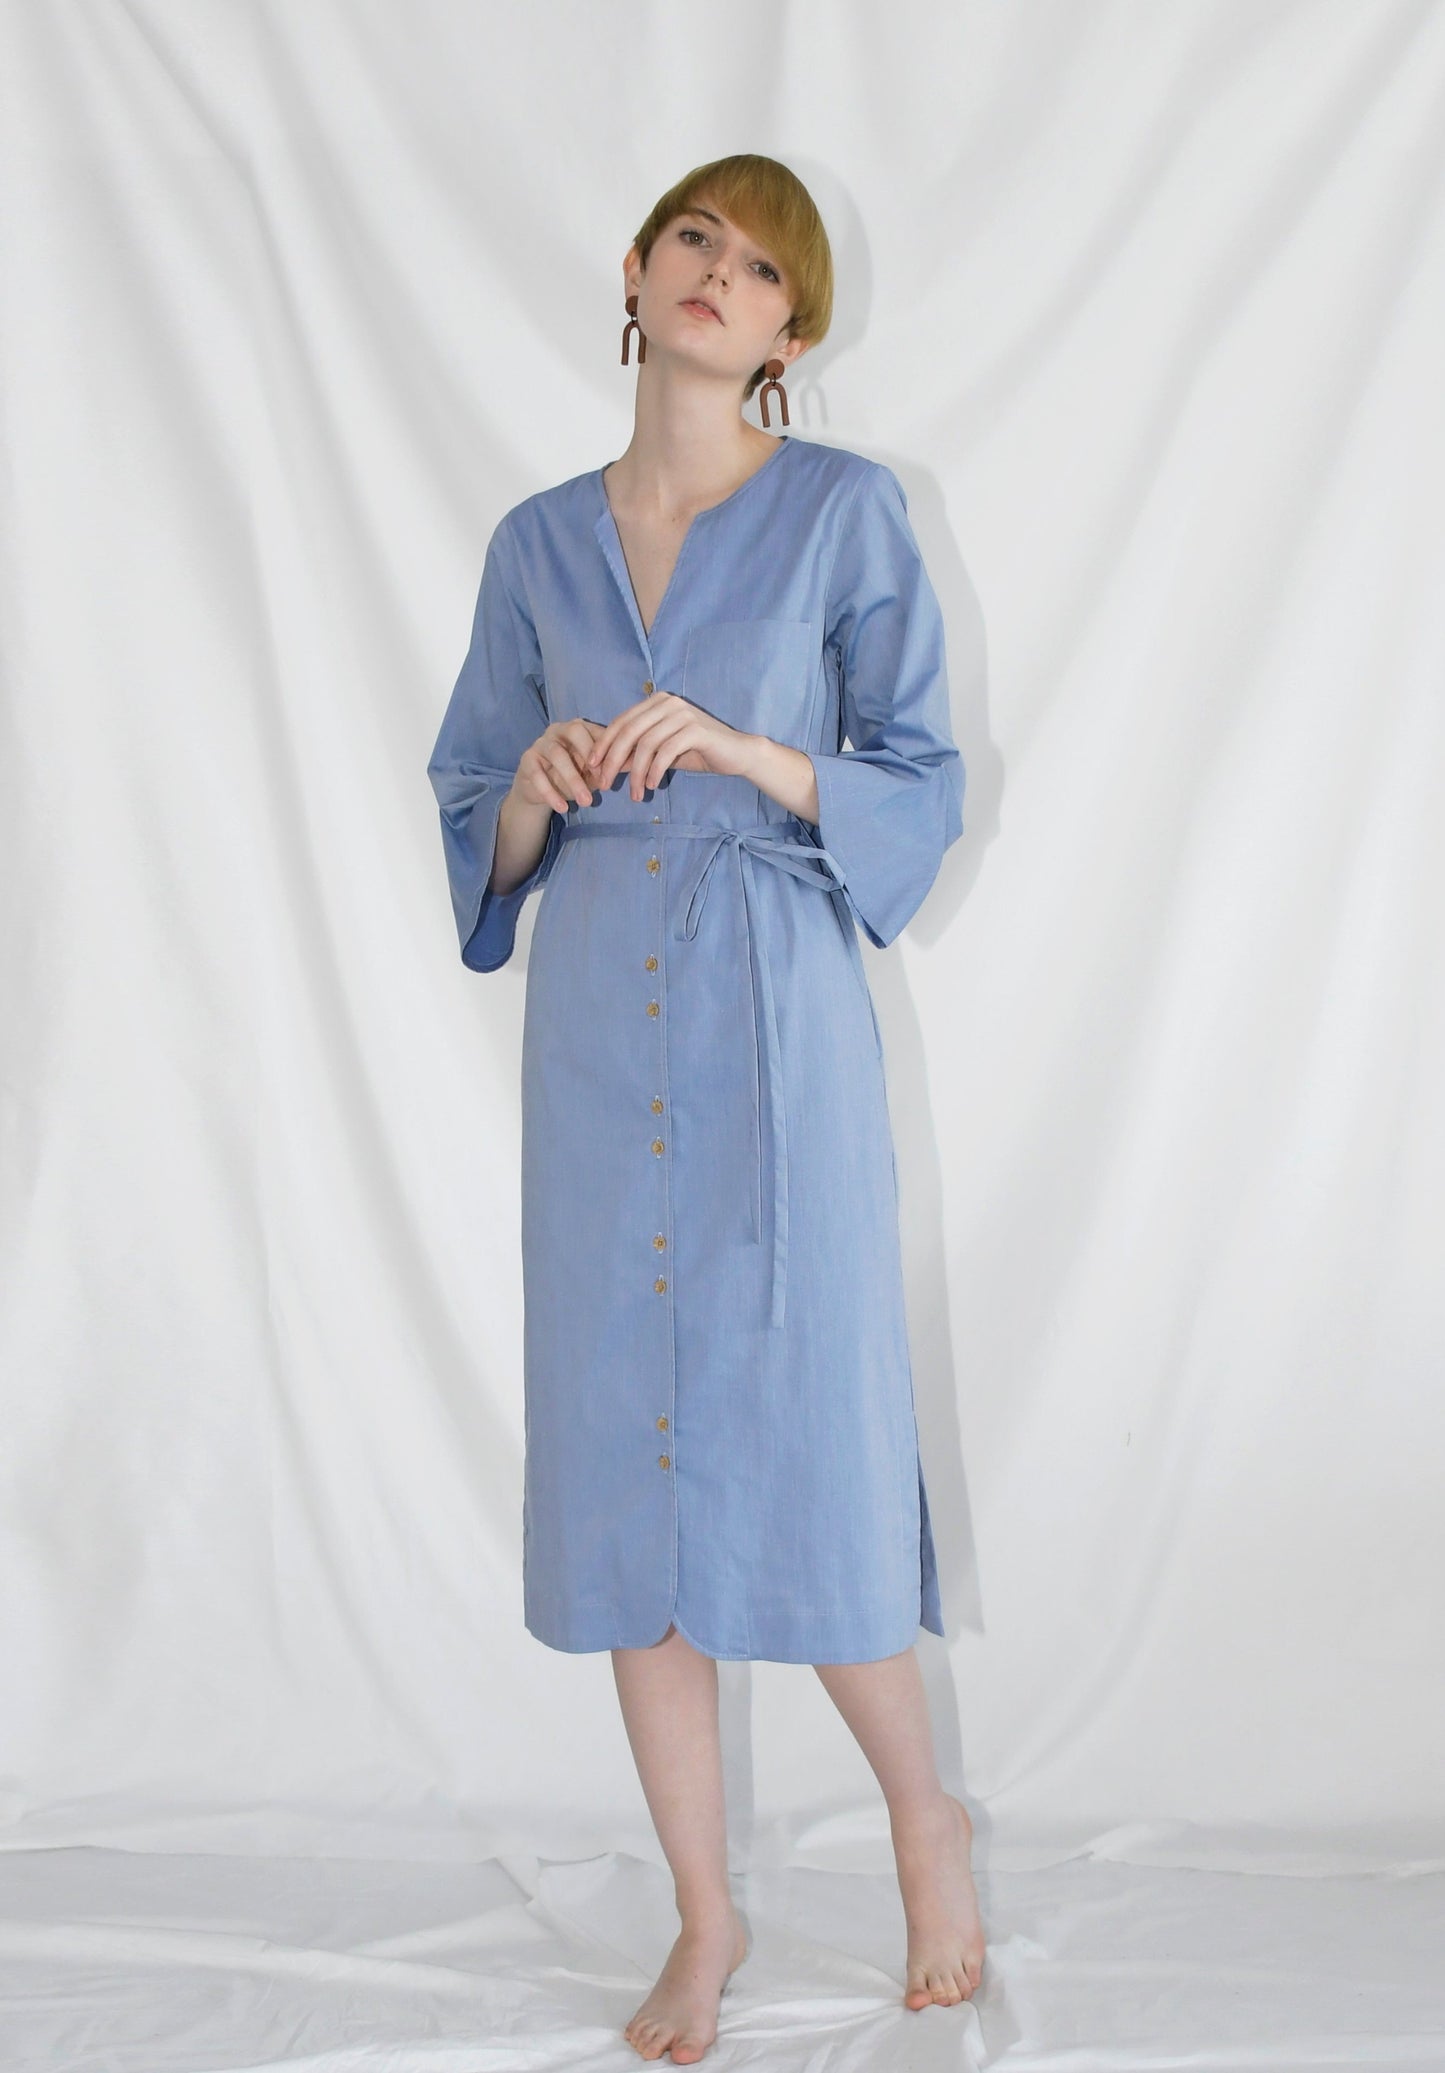 Reset Sale/ Gentle Slopes Dress / Blue Chambray